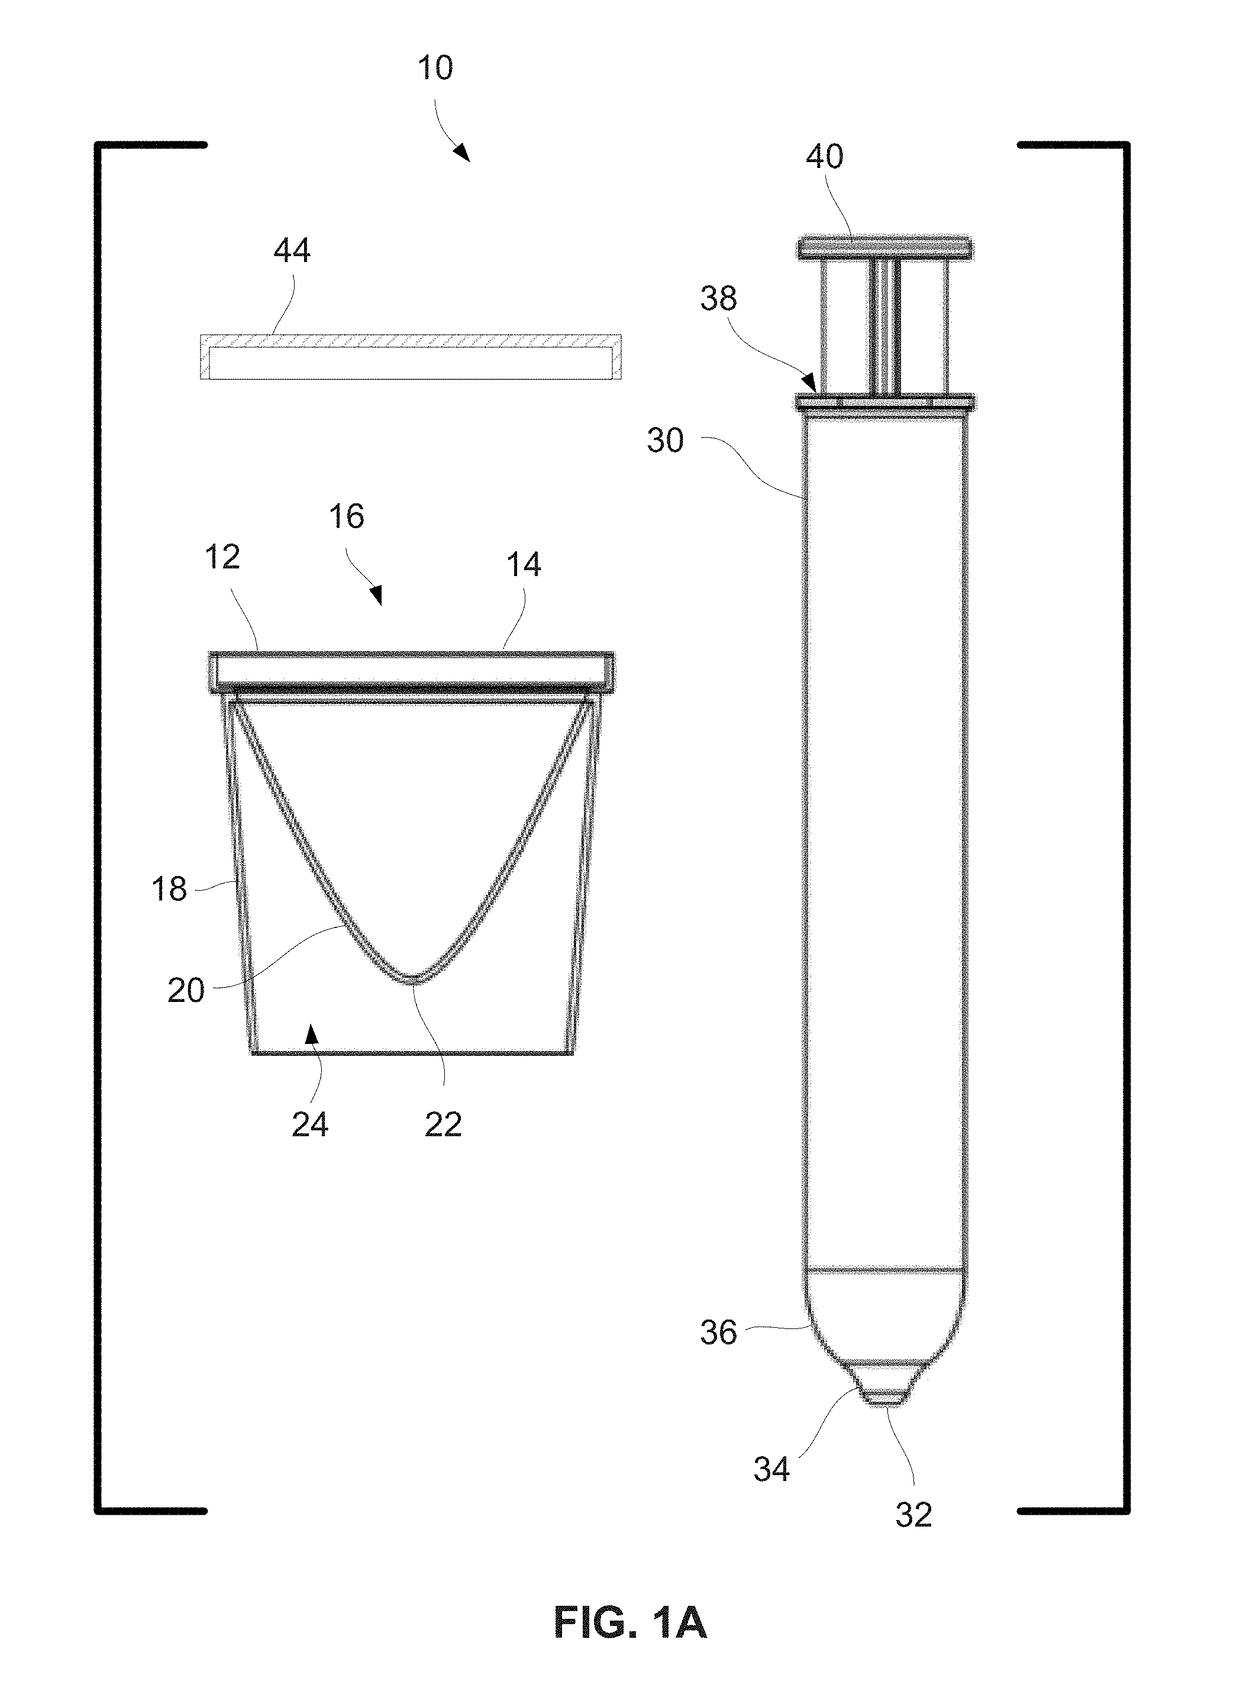 Bodily fluid collection system